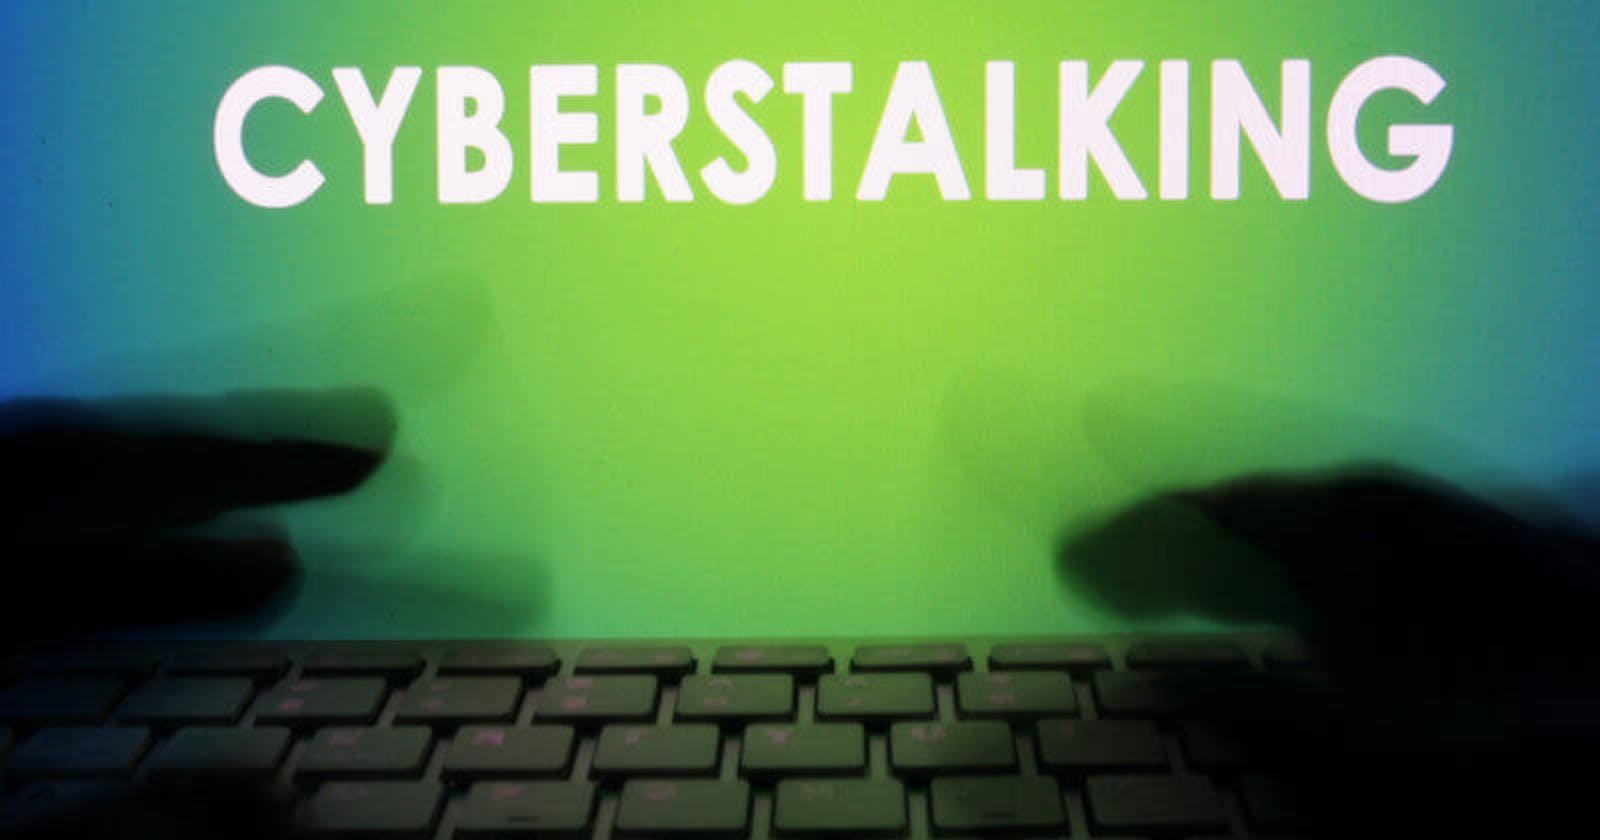 we need to known about cybertalking